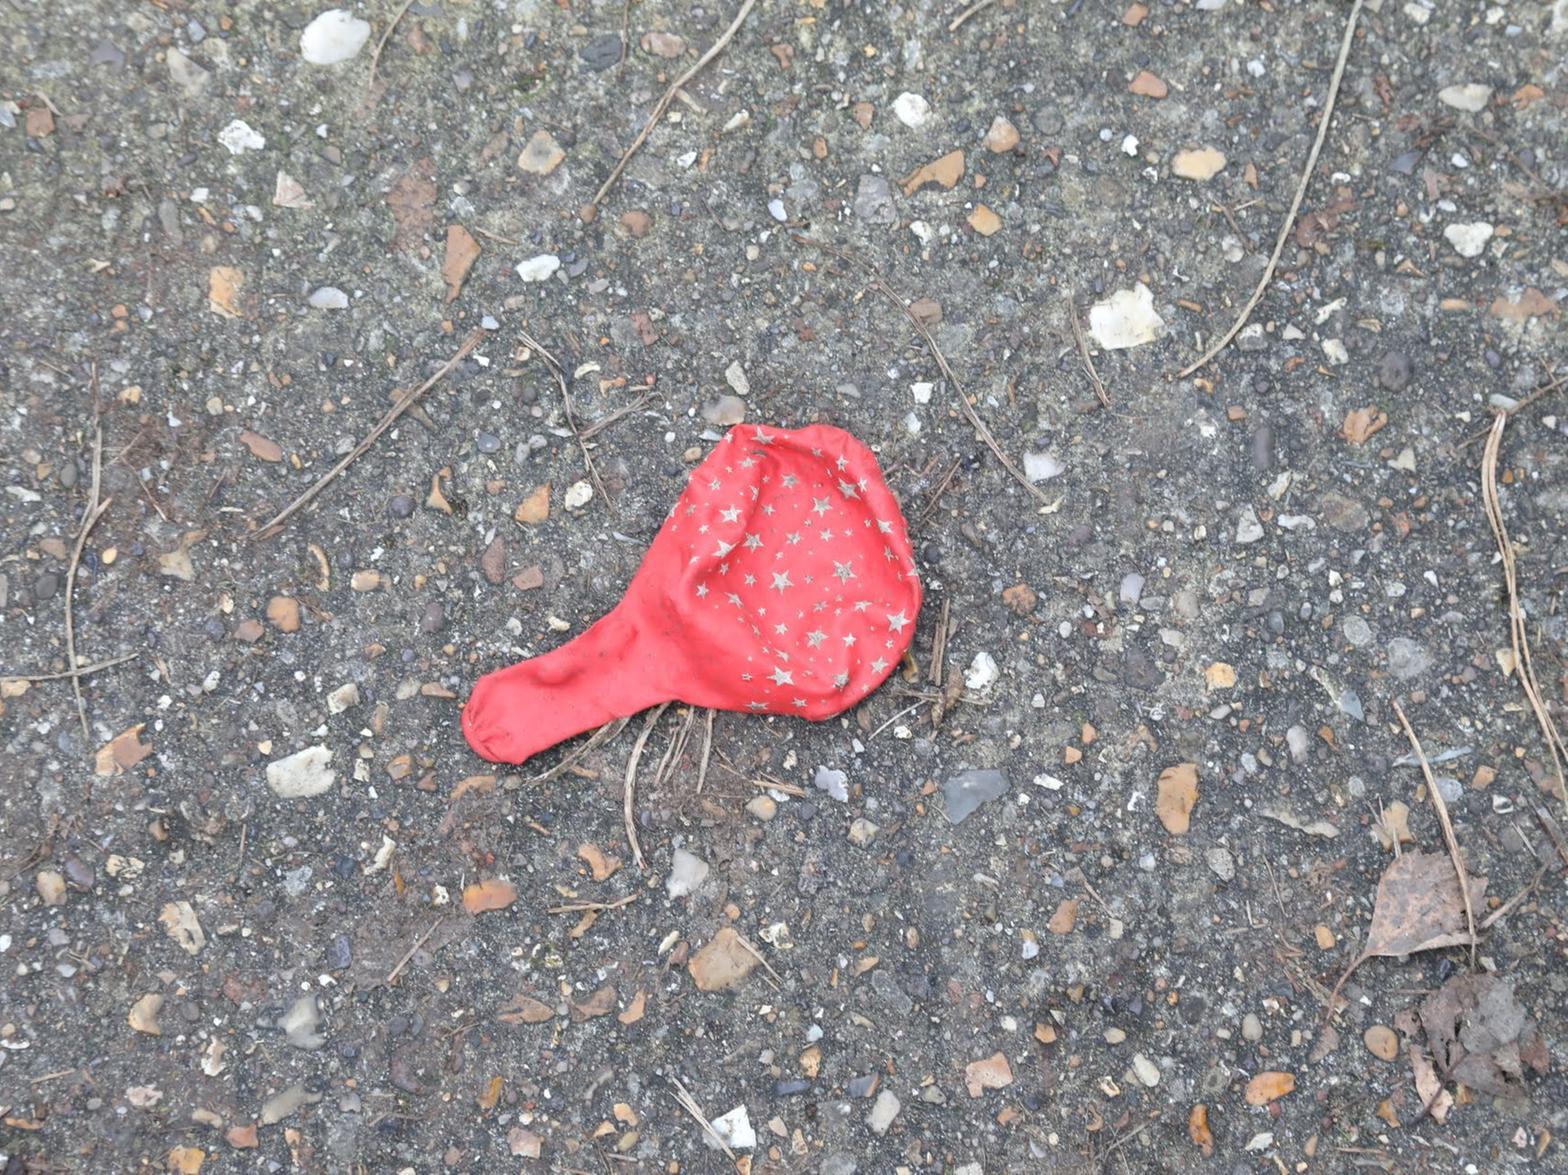 One of many balloons discarded at the rave. Pictures by Alison Bagley.